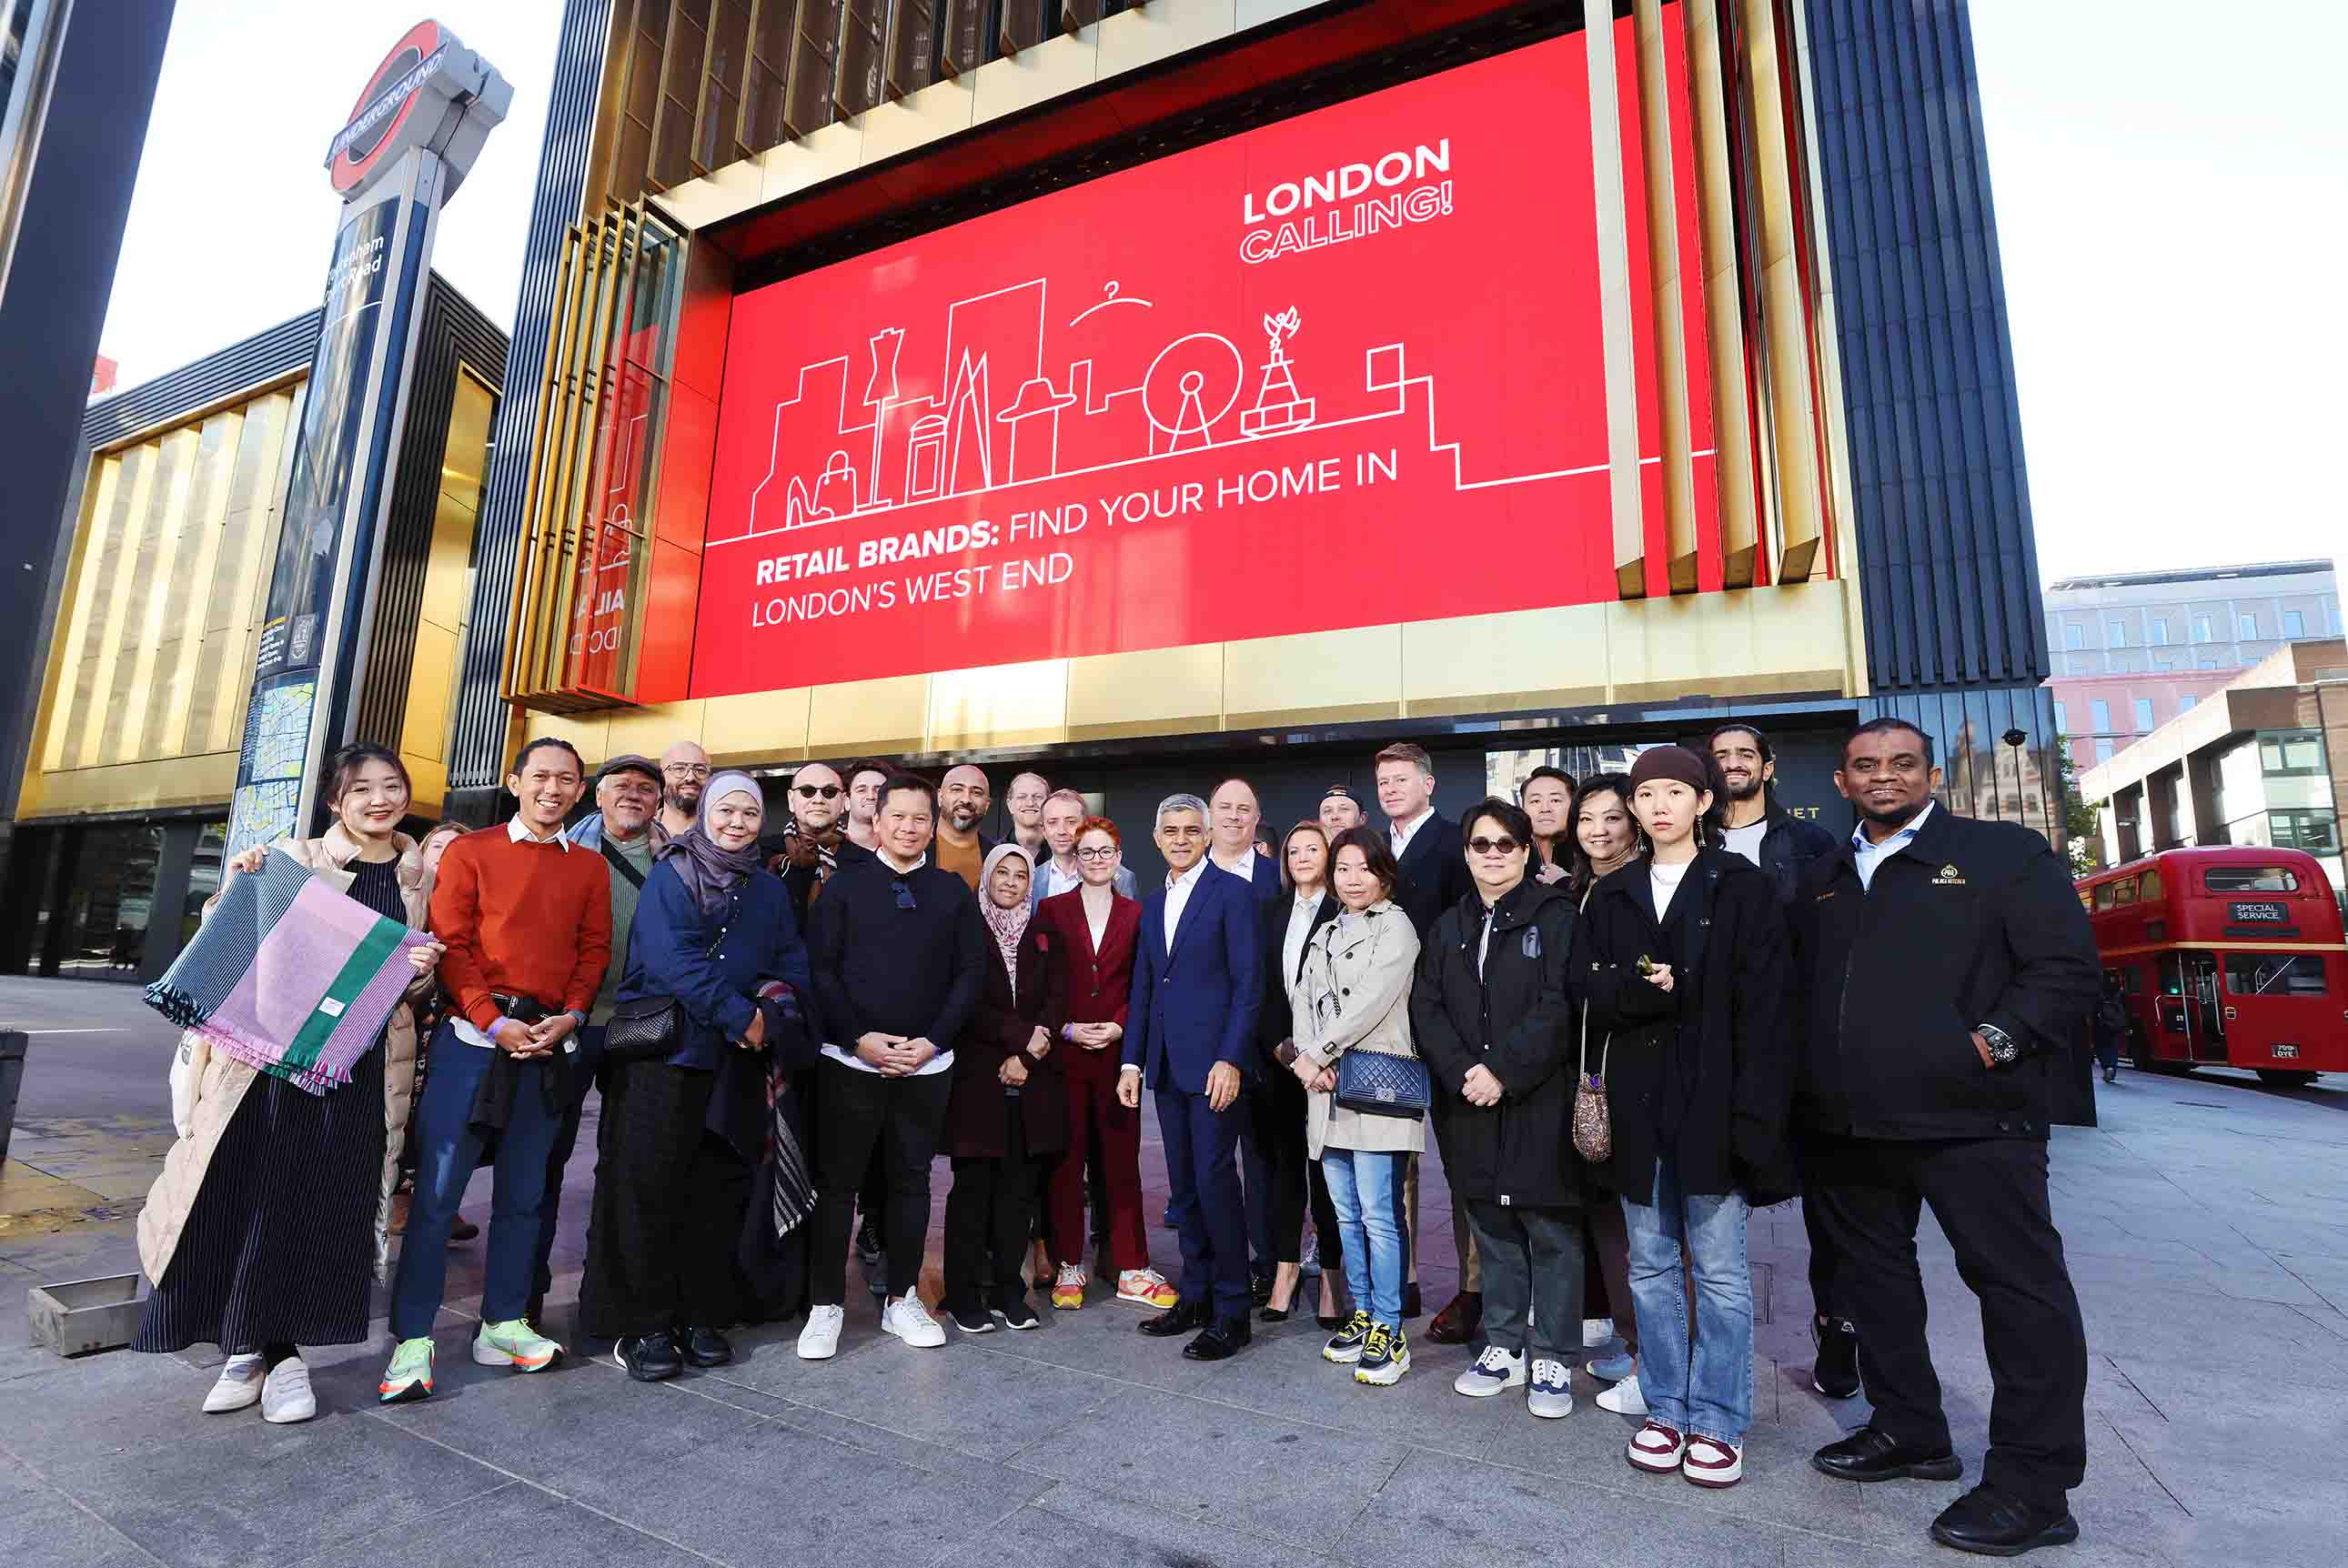 Mayor of London Sadiq Khan with representatives from retail brands standing in front of The Now Building